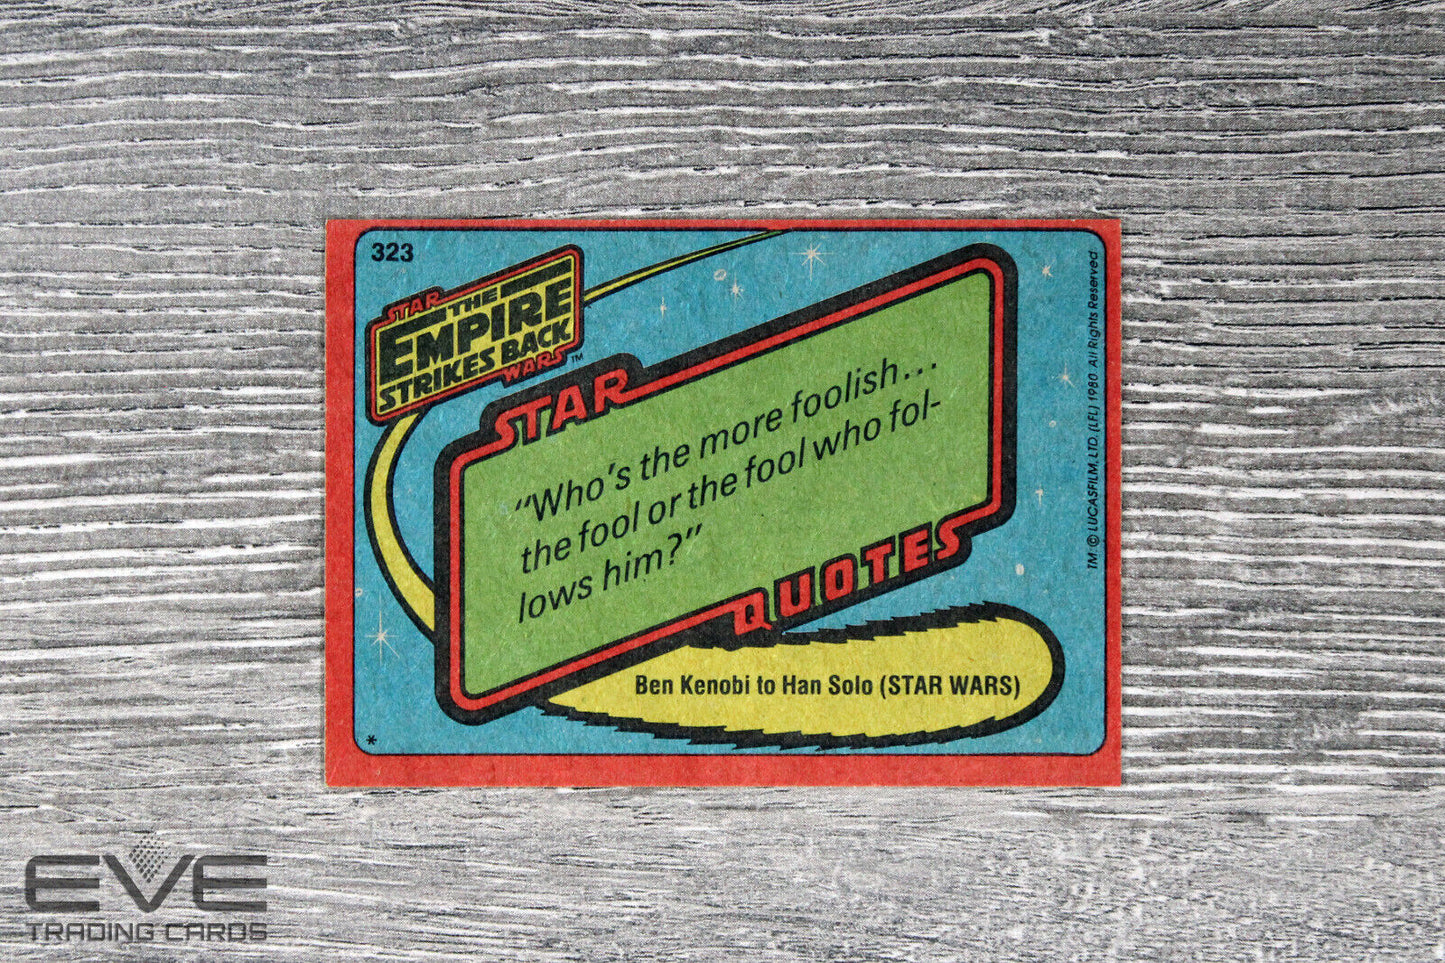 1980 Topps Vintage Star Wars Empire Strikes Back S3 Card #323 Their Last Kiss?